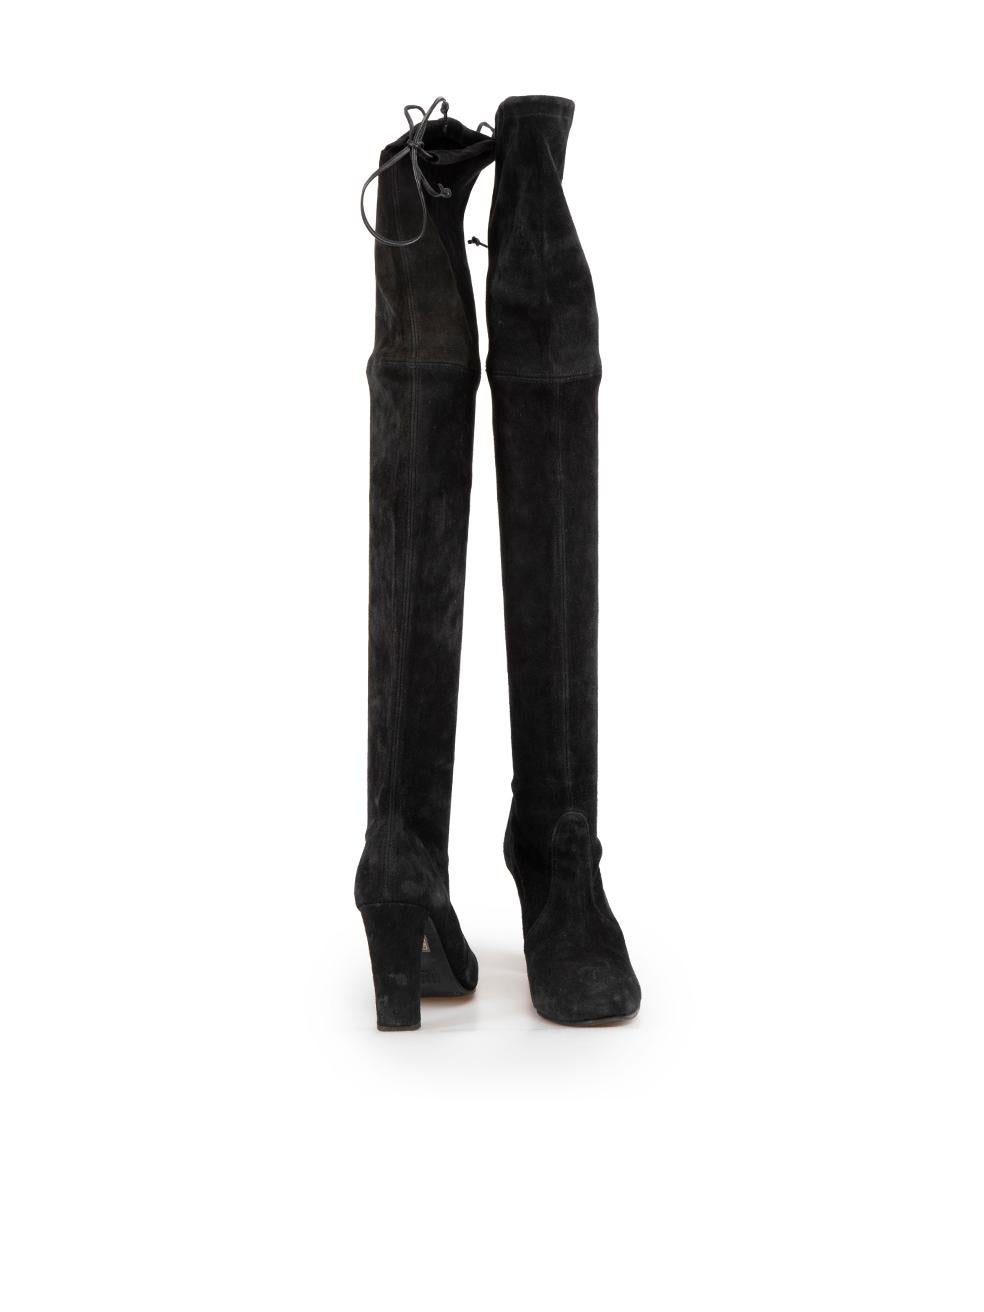 Stuart Weitzman Black Suede Over The Knee Heeled Boots Size IT 36 In Good Condition For Sale In London, GB